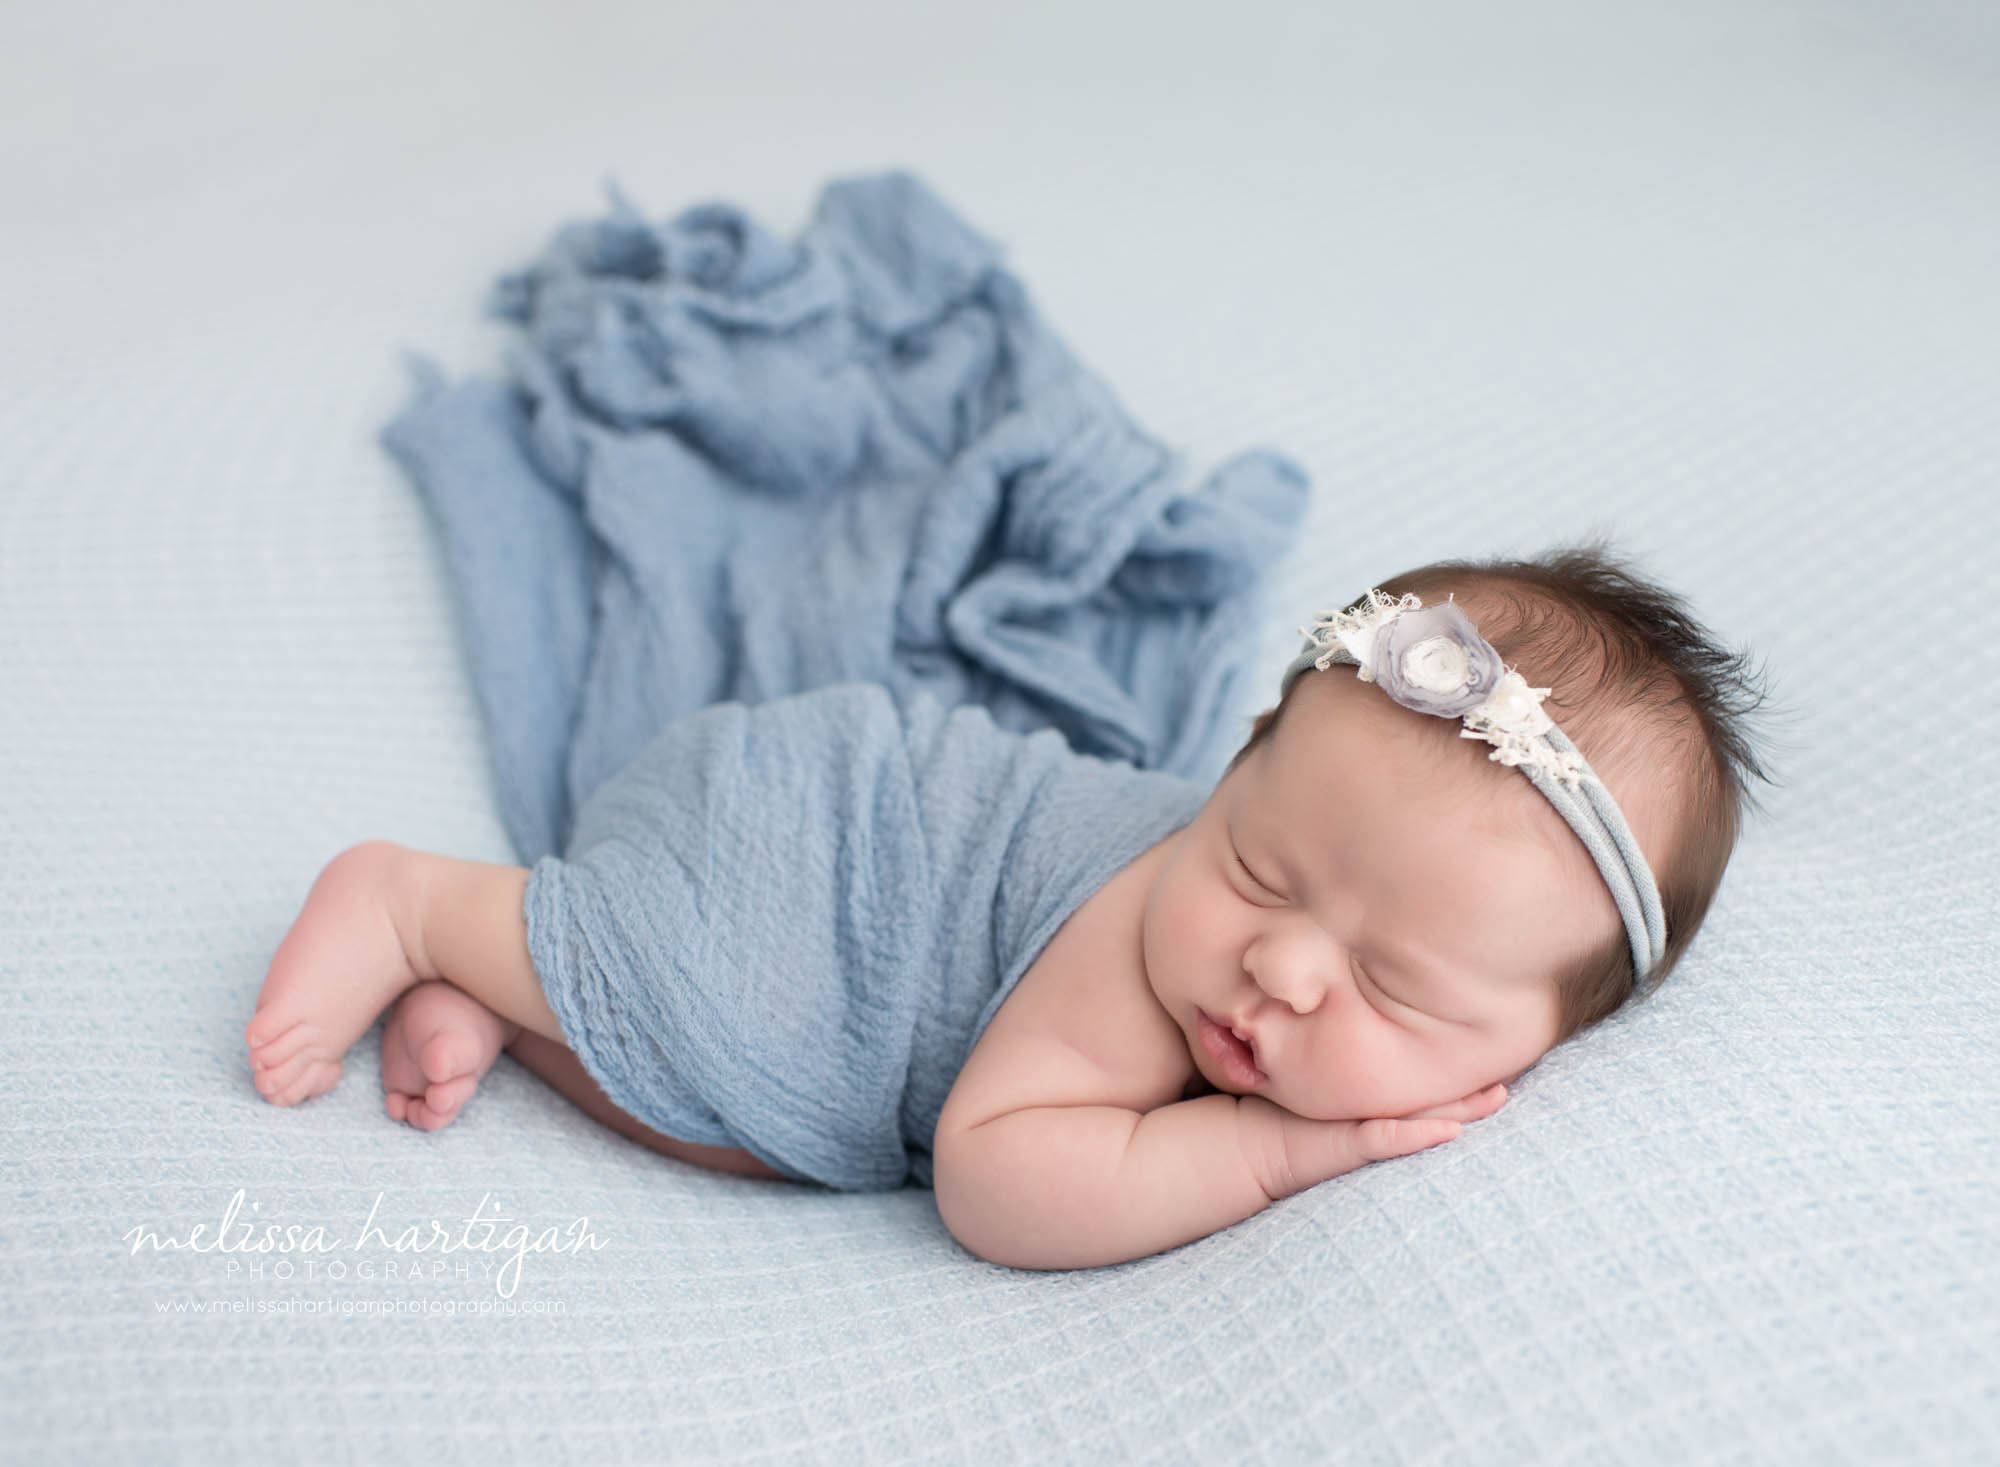 Melissa Hartigan Photography Connecticut Newborn Photographer Coventry Ct Middlefield CT baby Fairfield county Newborn and maternity photography Baby girl blue wrap with blue floral headband sleeping head on hands